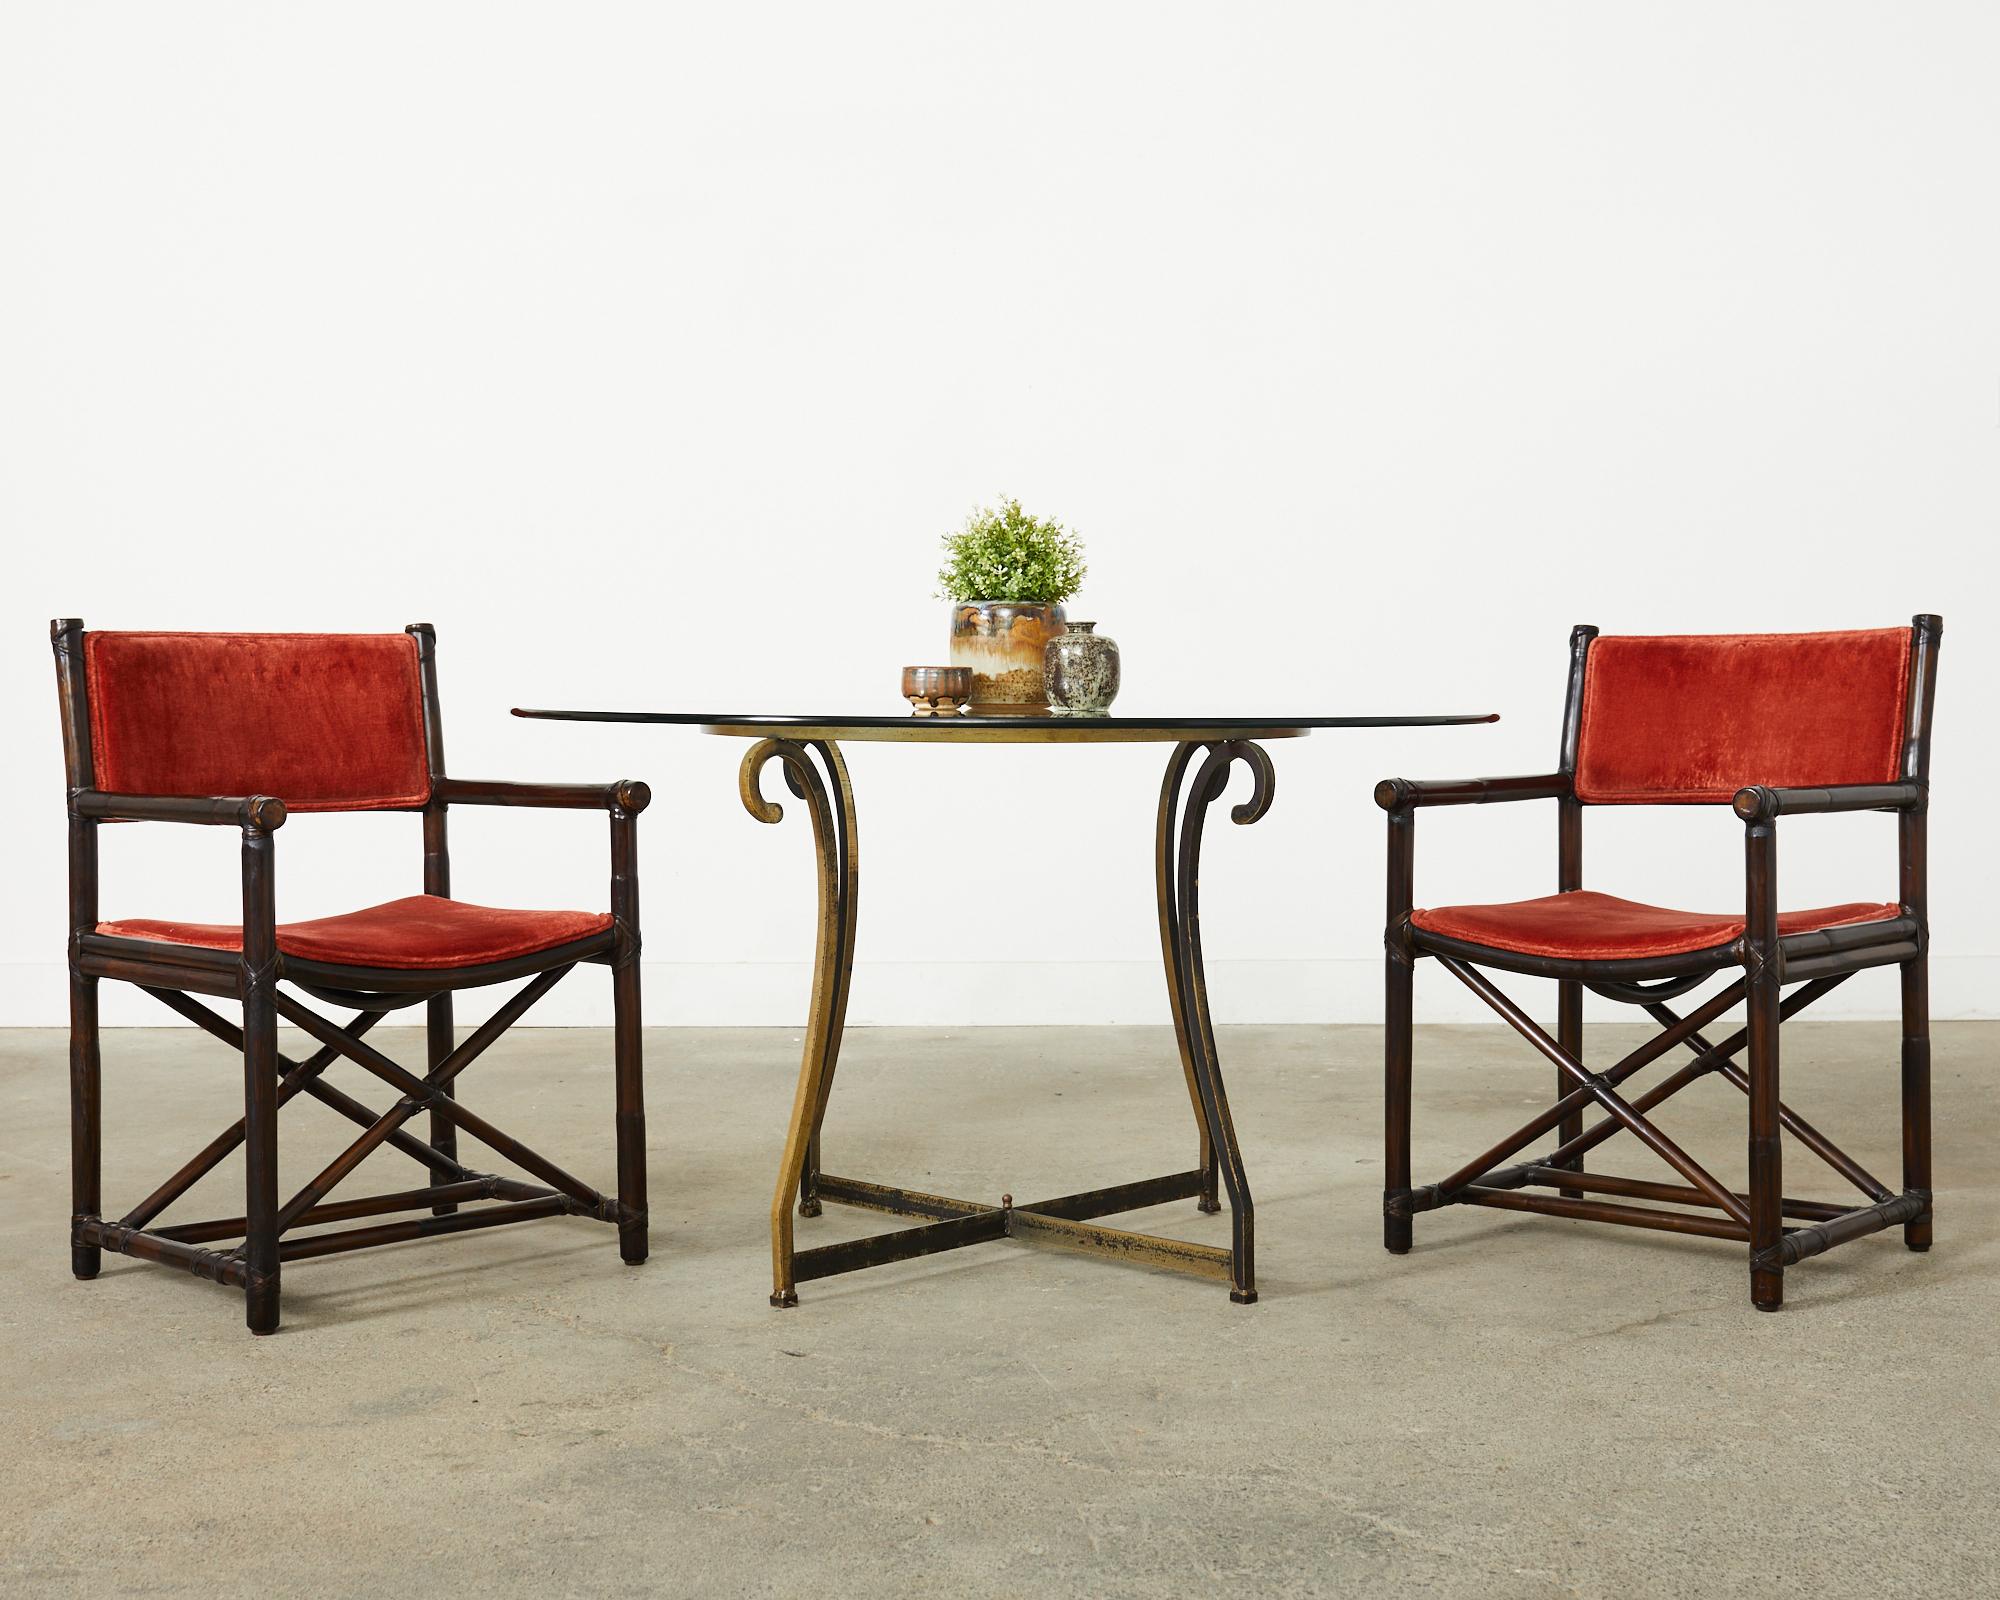 Rare set of six bespoke rattan directors style dining chairs made in the California organic modern style by McGuire San Francisco, CA. The chairs feature thick pole rattan frames with woven honeycomb cane insets. The set consists of four side chairs